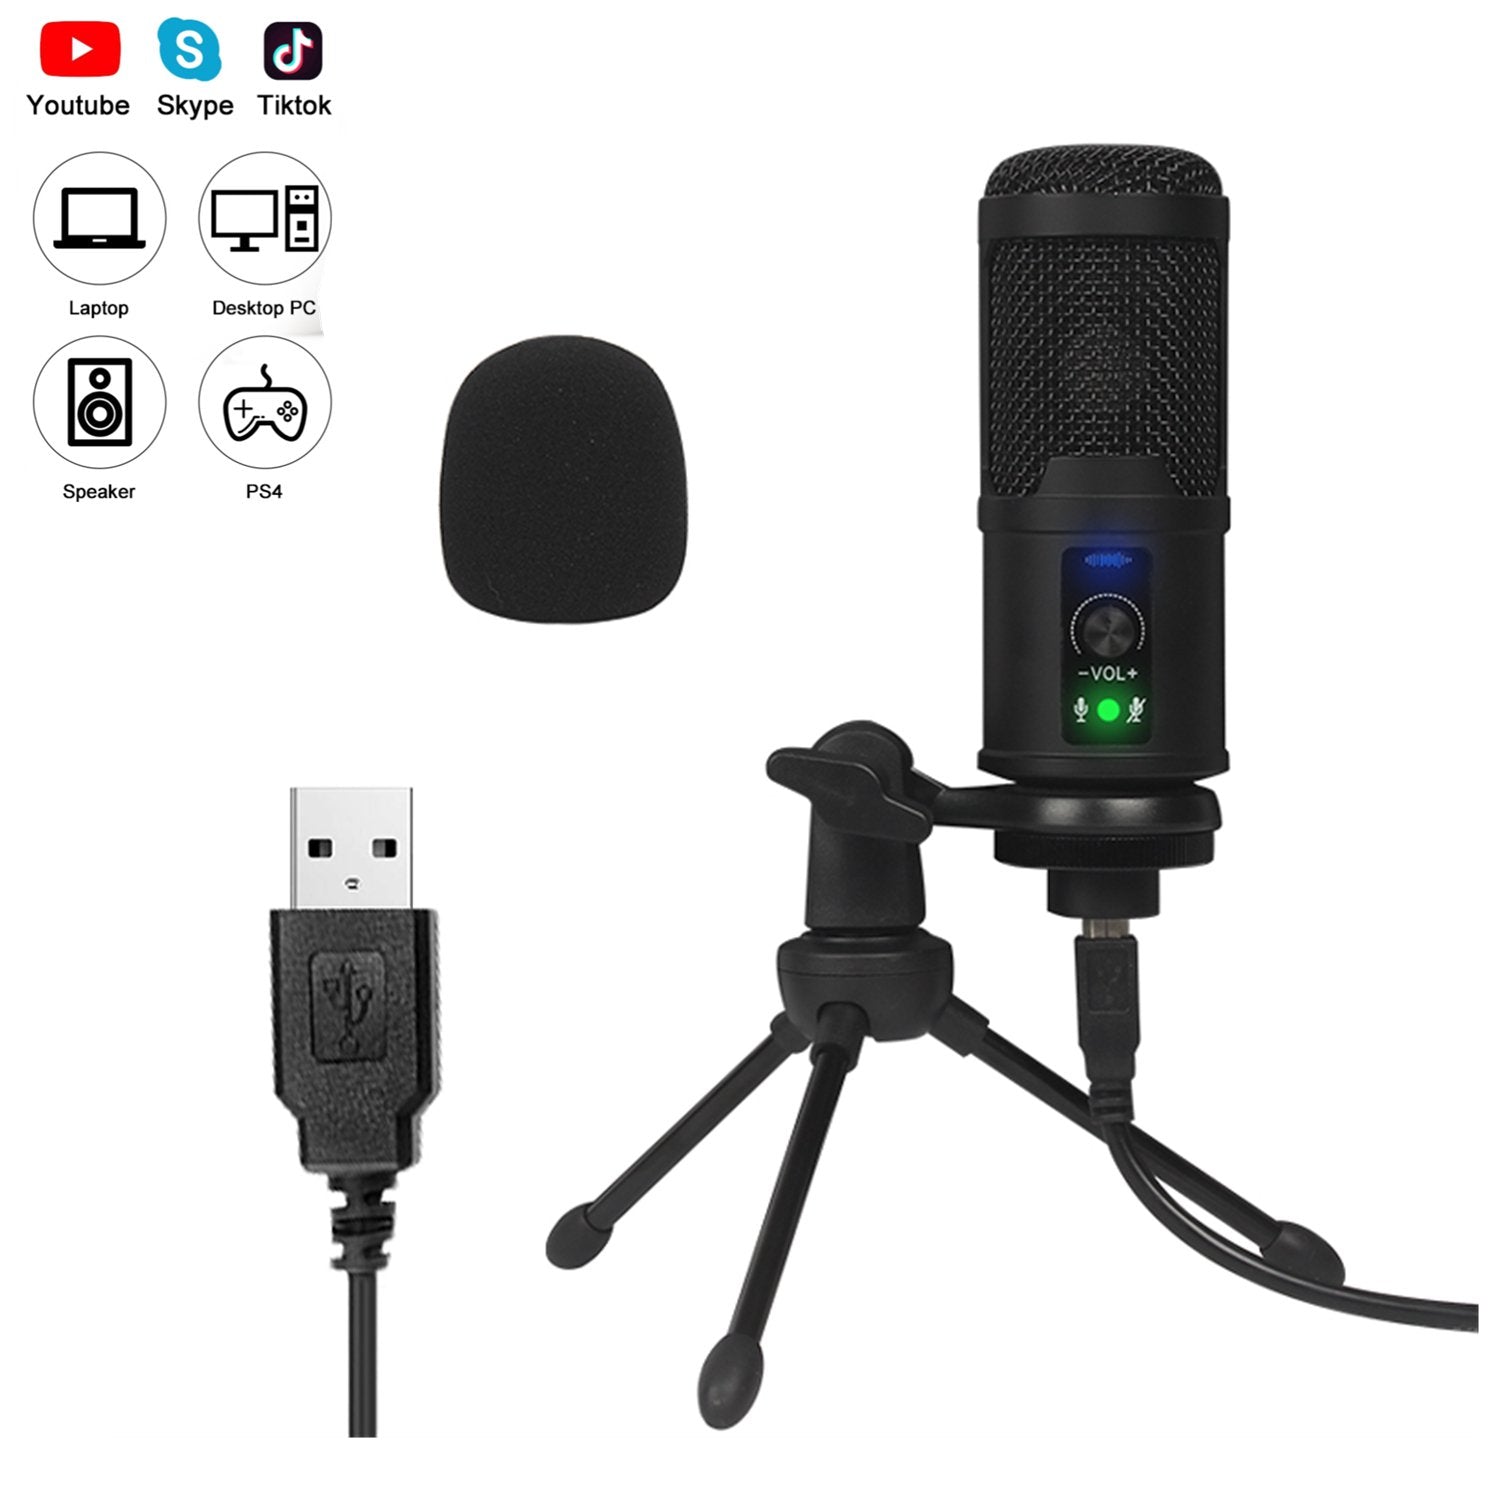 USB PC Microphone Kit, 192kHz/24Bit Professional Supercardioid Condenser Mic with Tripod for Skype YouTuber Karaoke Gaming Recording